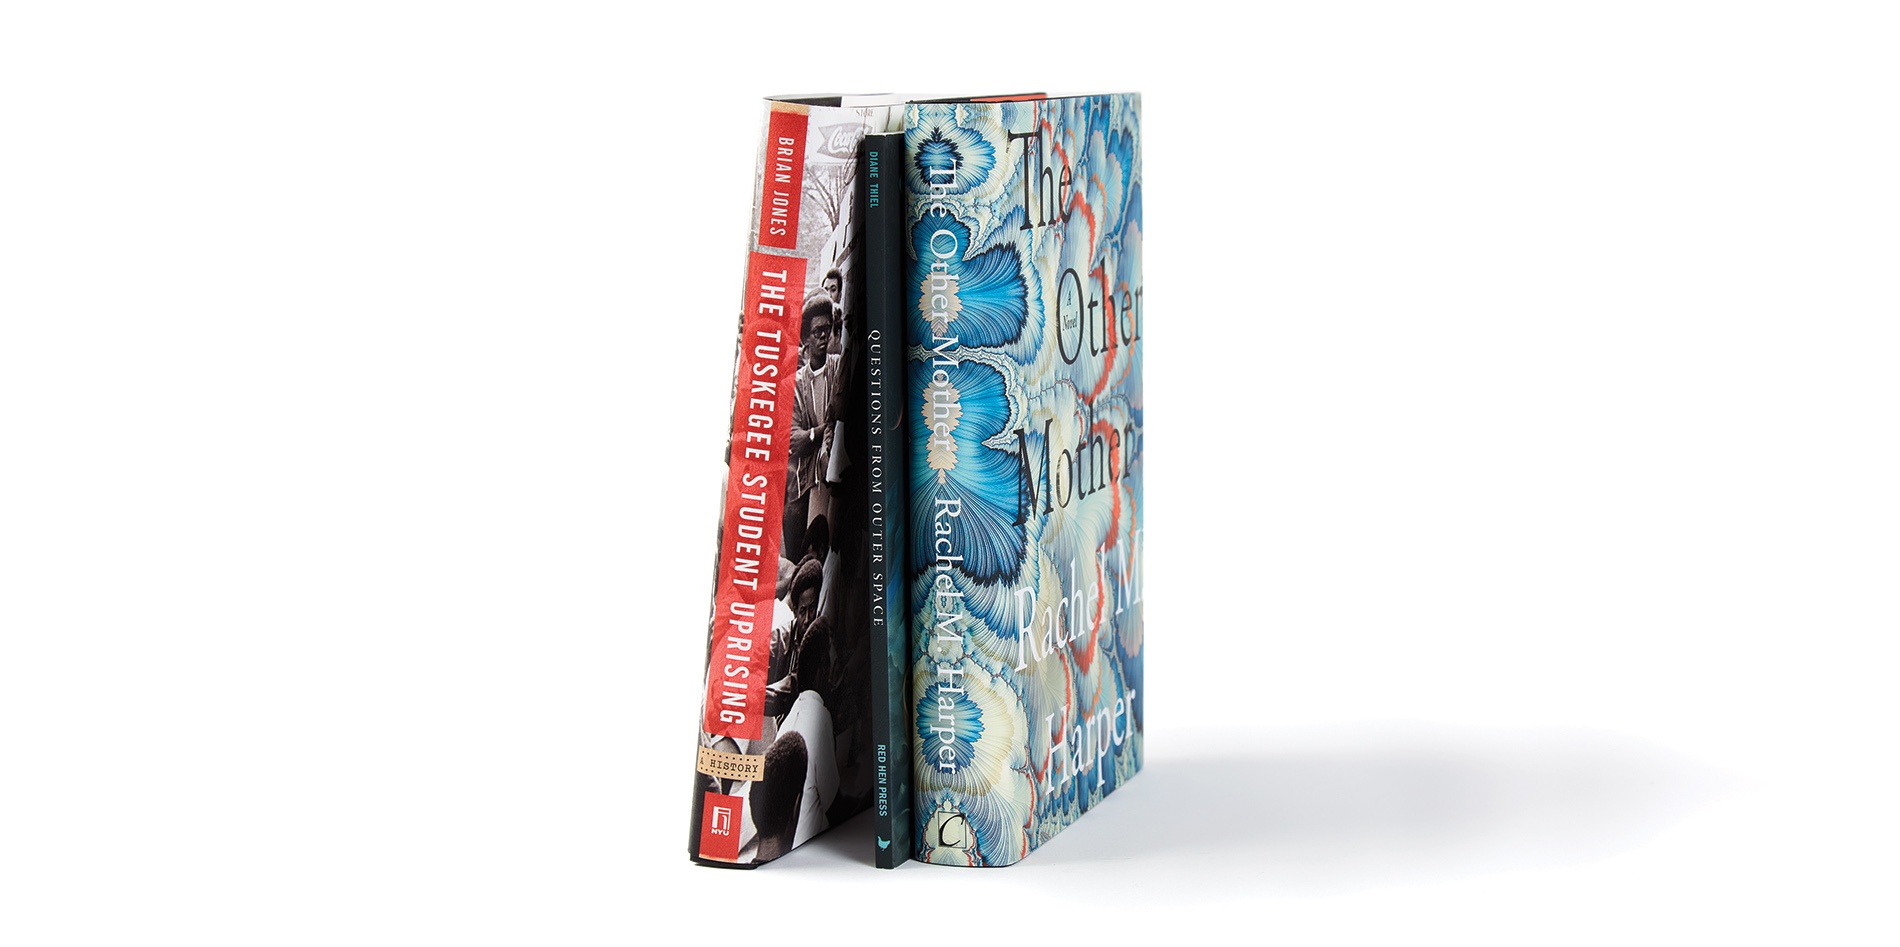 Image of the spines of books by Brian Jones ’95, Diane Thiel ’88, ’90 MFA, and Rachel M. Harper ’94